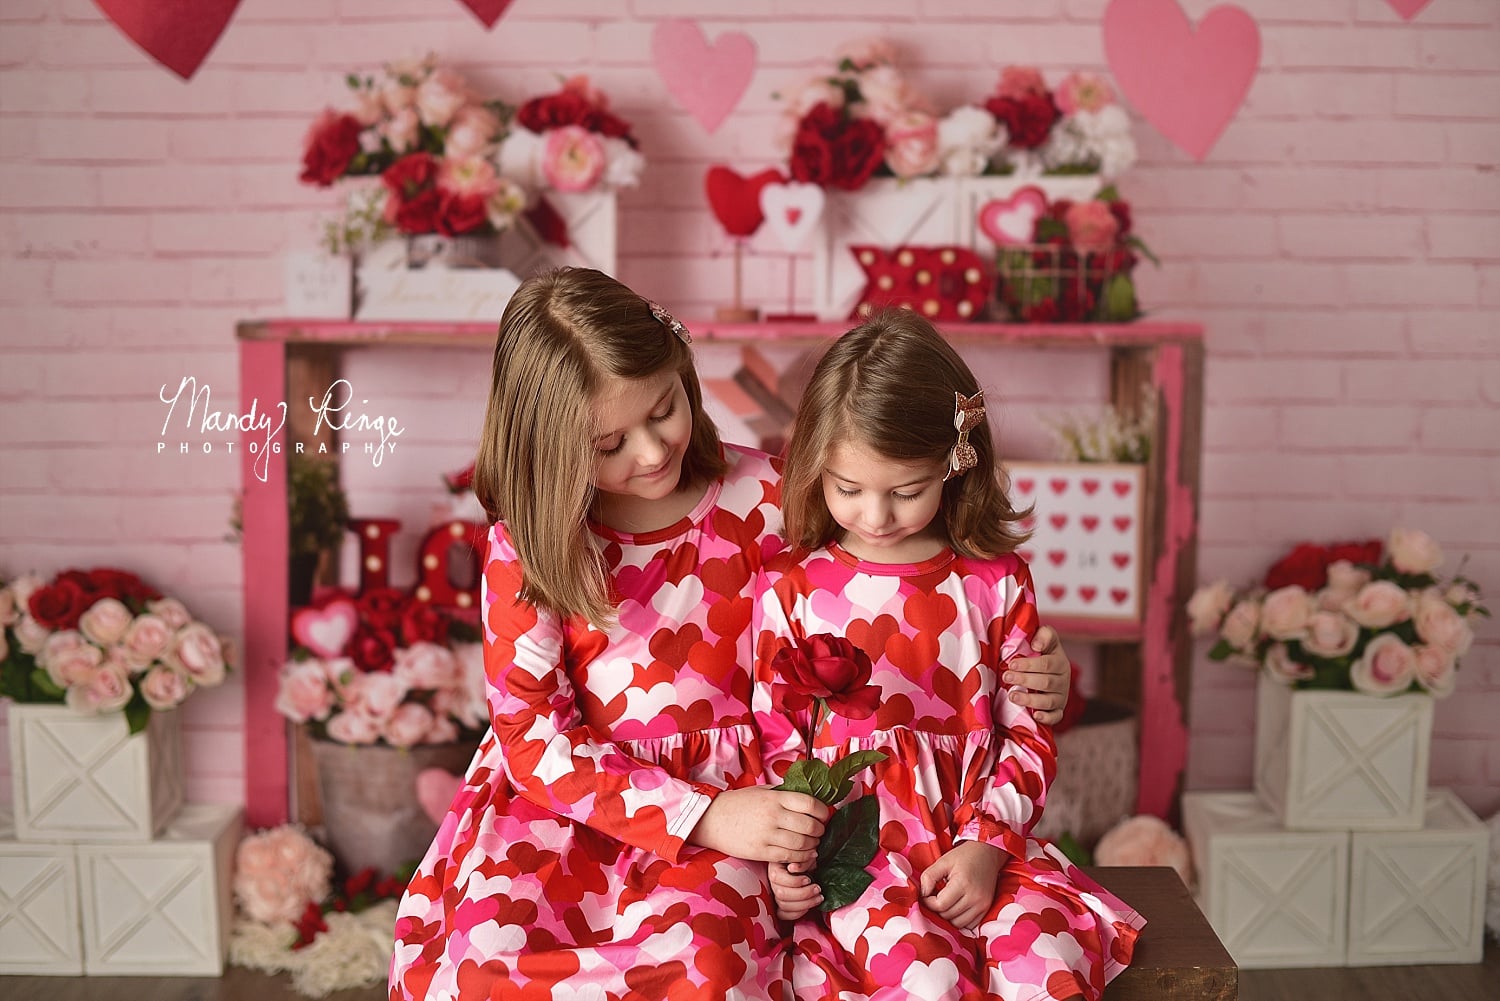 Kate Valentine's Day Love Heart Backdrop Designed by Mandy Ringe Photography